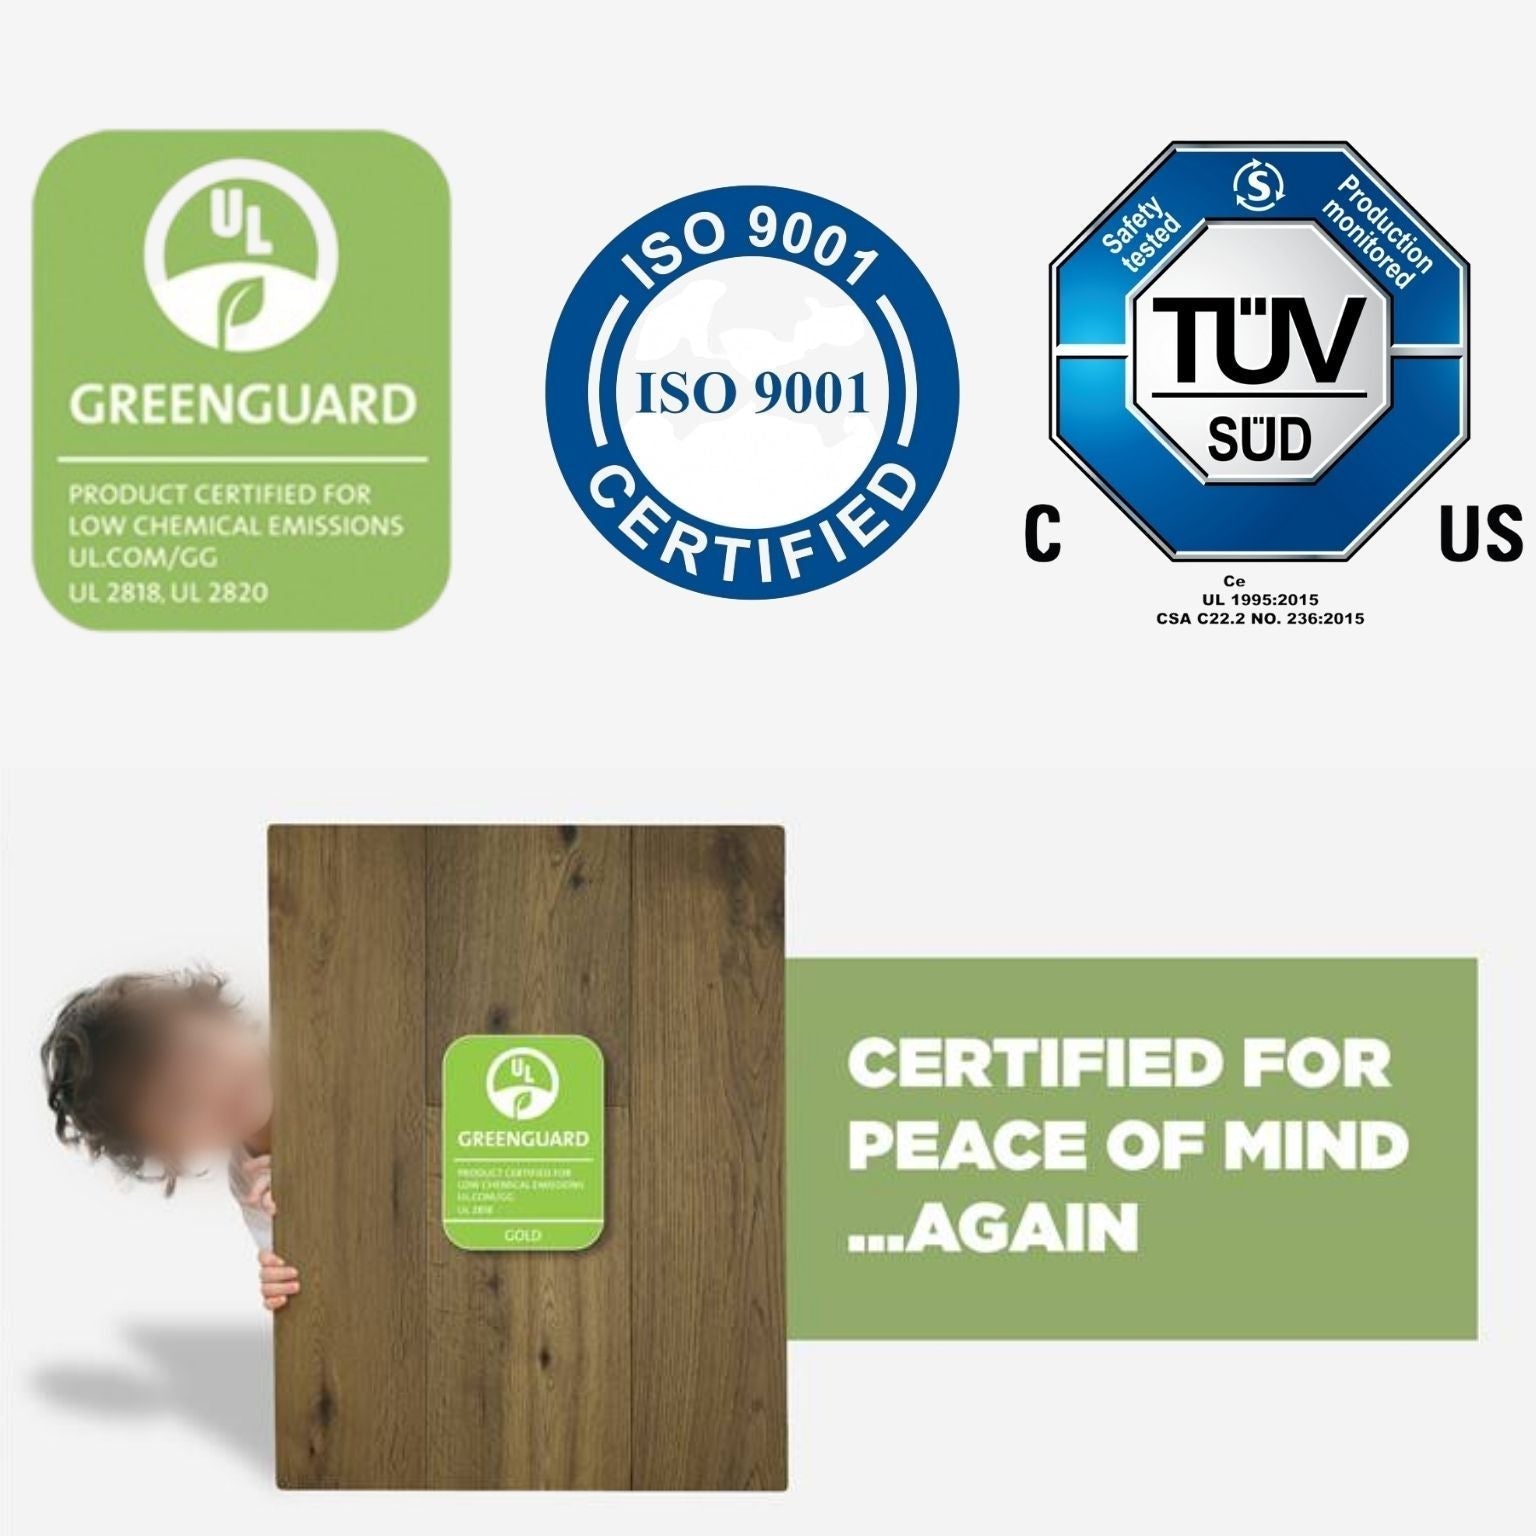 factory quality-furniture certifications TUV ISO9001 Green Guard